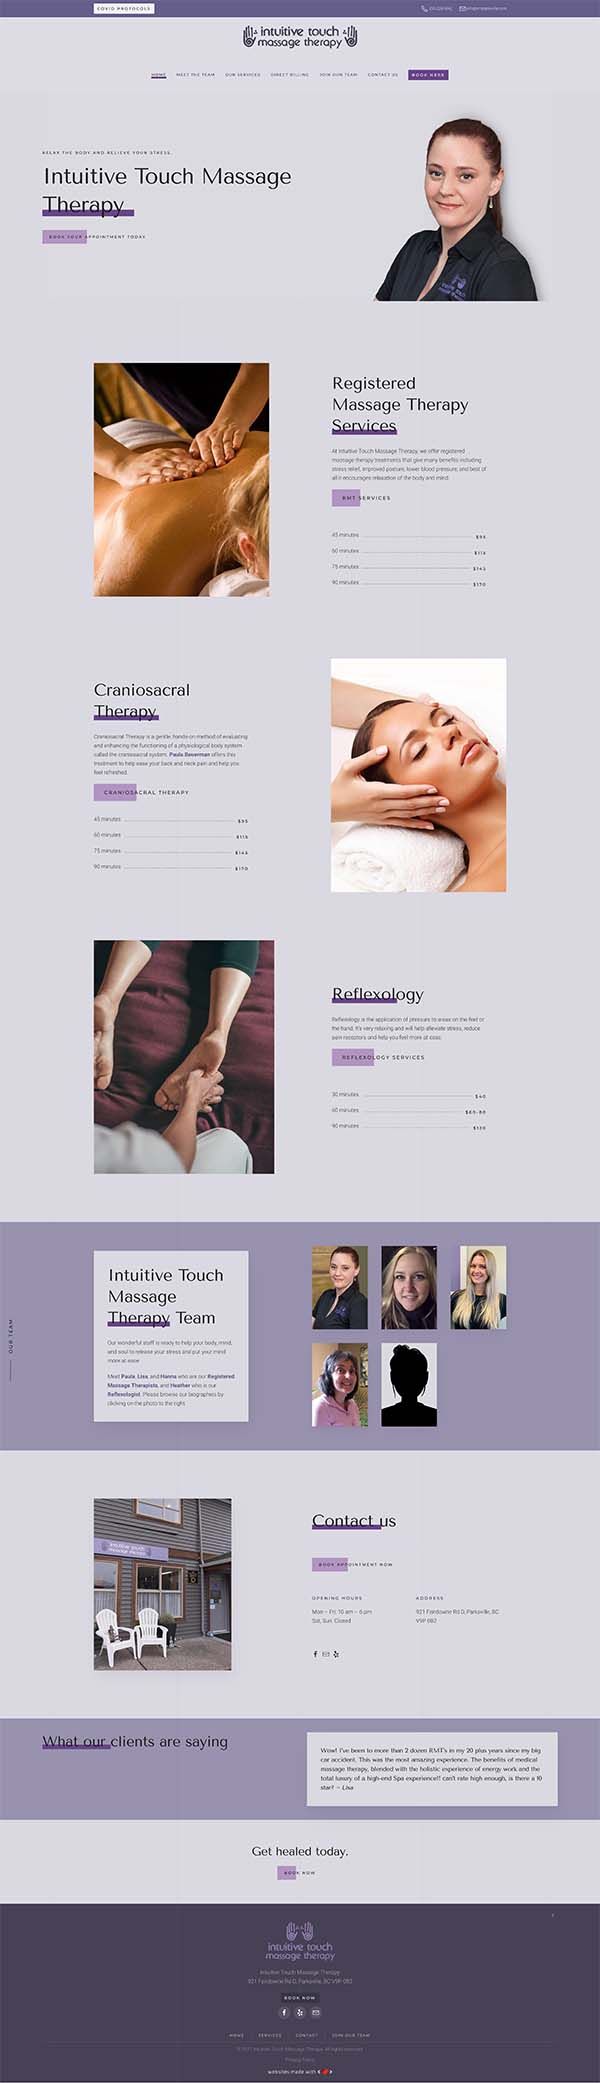 Full screen home page layout for Intuitive Touch Massage Therapy in Parksville, BC